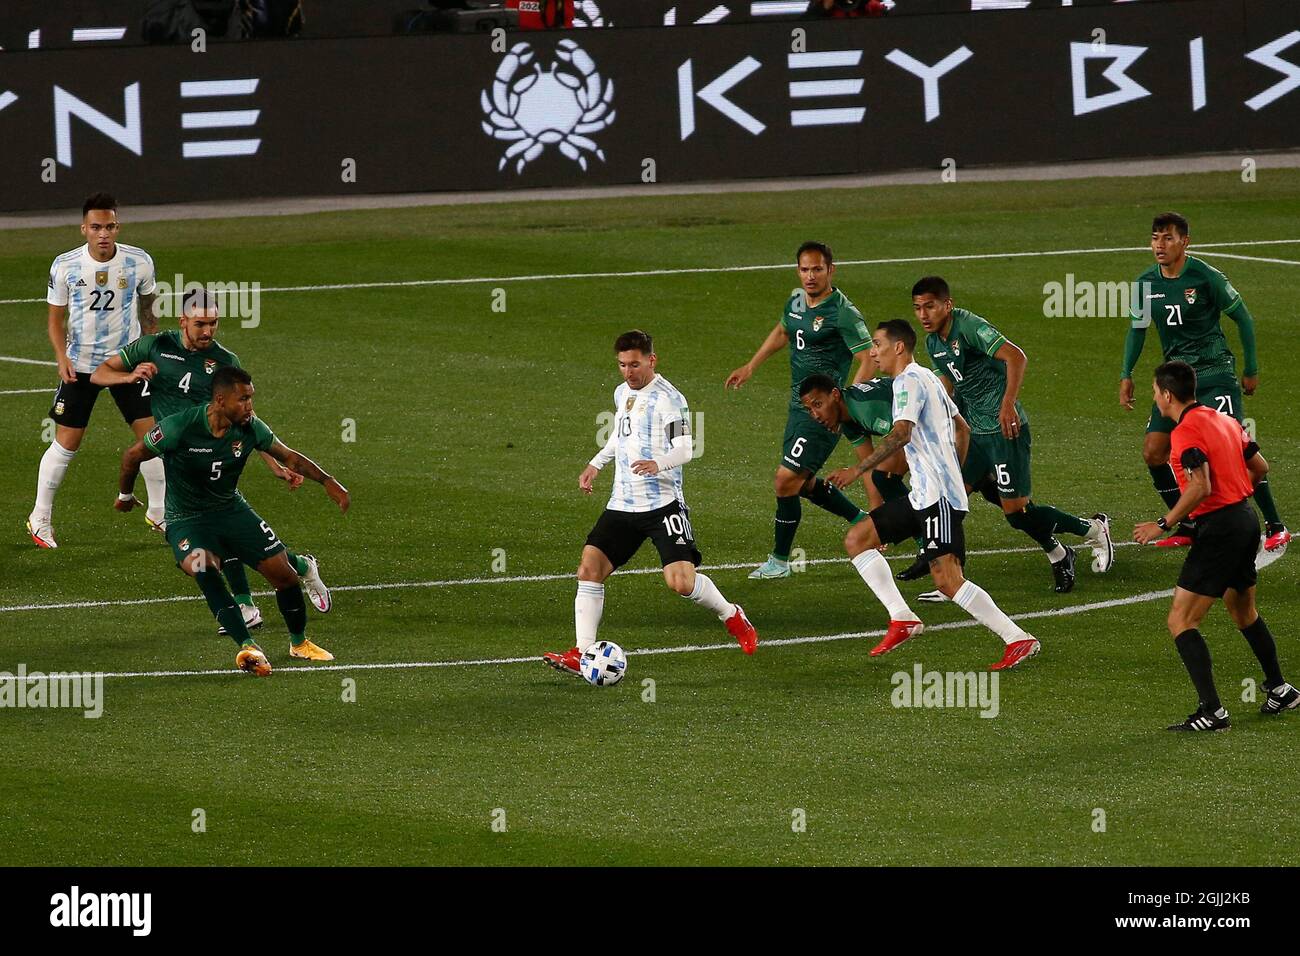 Buenos Aires, Argentina. 09th Sep, 2021. BUENOS AIRES - SEPTEMBER 9: Forward Lionel Messi (10) of Argentina controls the ball during a match between Argentina and Bolivia as part of South American Qualifiers for Qatar 2022 at Estadio Monumental Antonio Vespucio Liberti on September 9, 2021 in Buenos Aires, Argentina. (Photo by Florencia Tan Jun/PxImages) Credit: Px Images/Alamy Live News Stock Photo